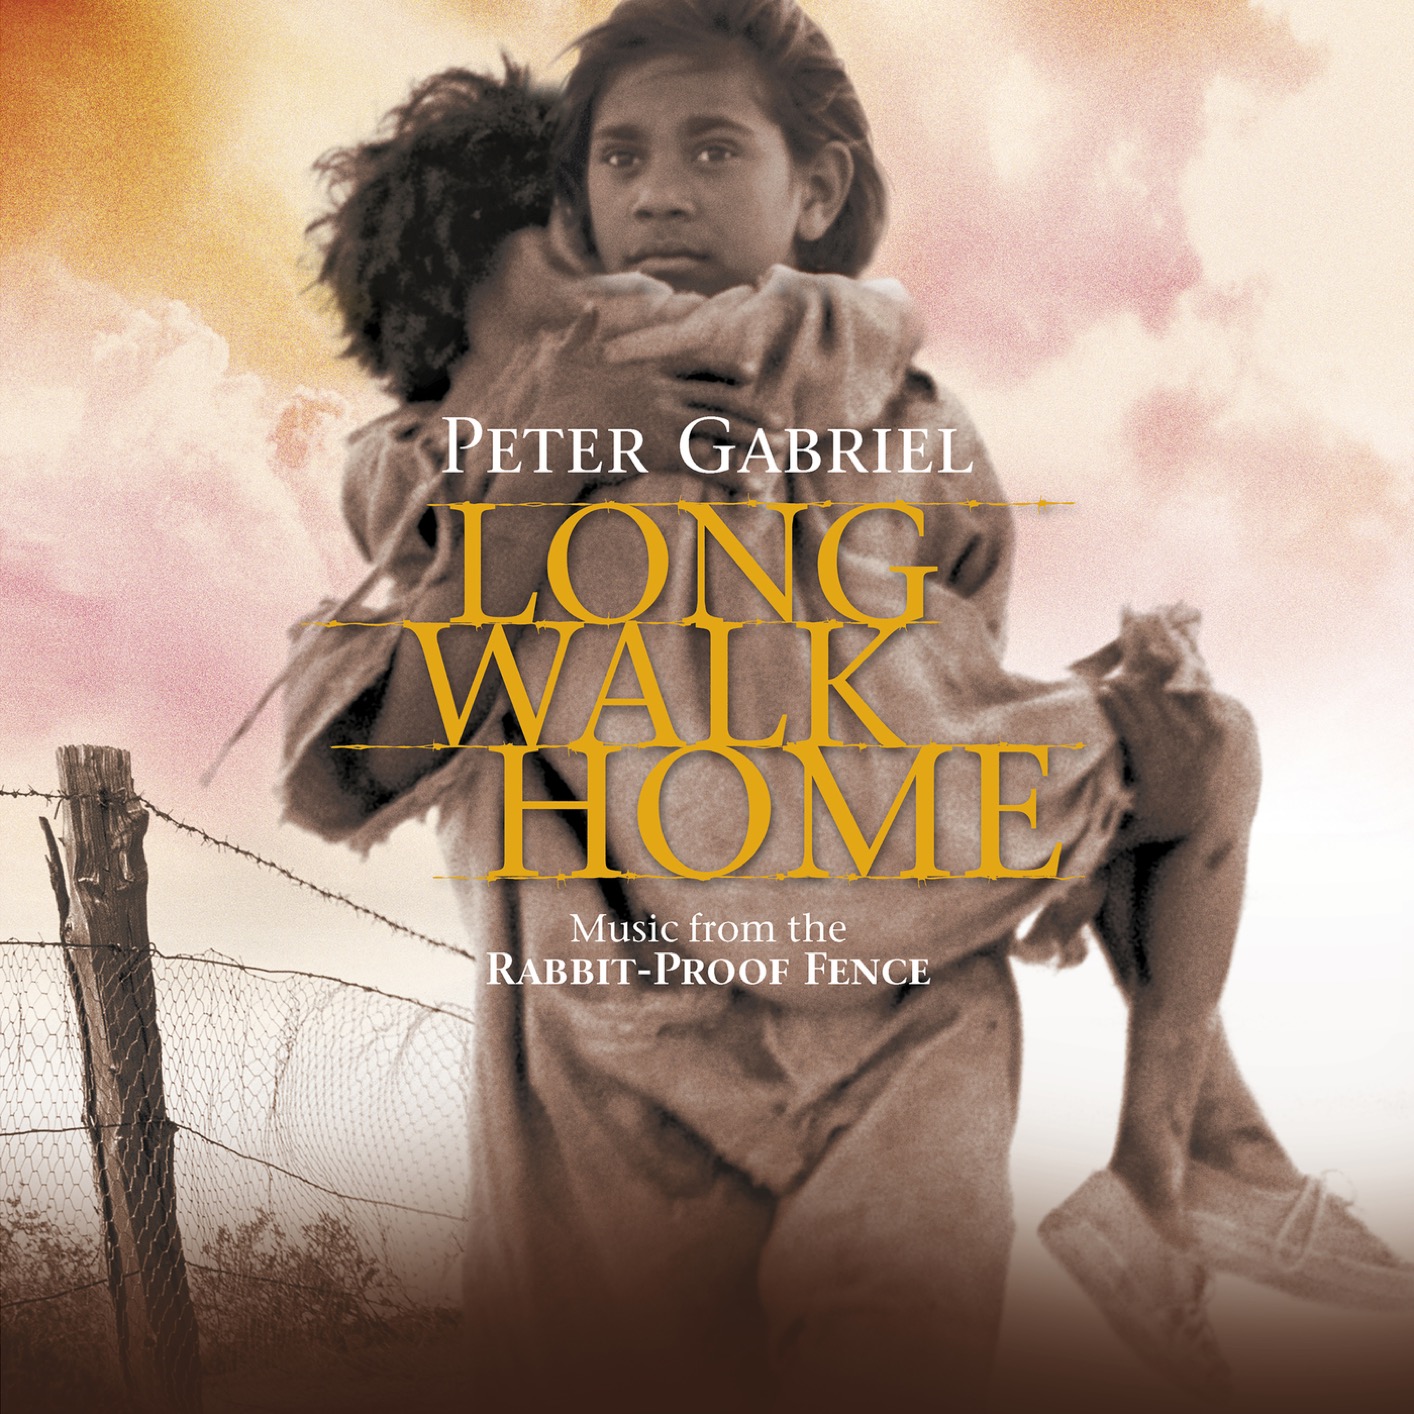 Peter Gabriel - Long Walk Home (Music From The Rabbit-Proof Fence / Remastered) (2002/2019) [FLAC 24bit/44,1kHz]